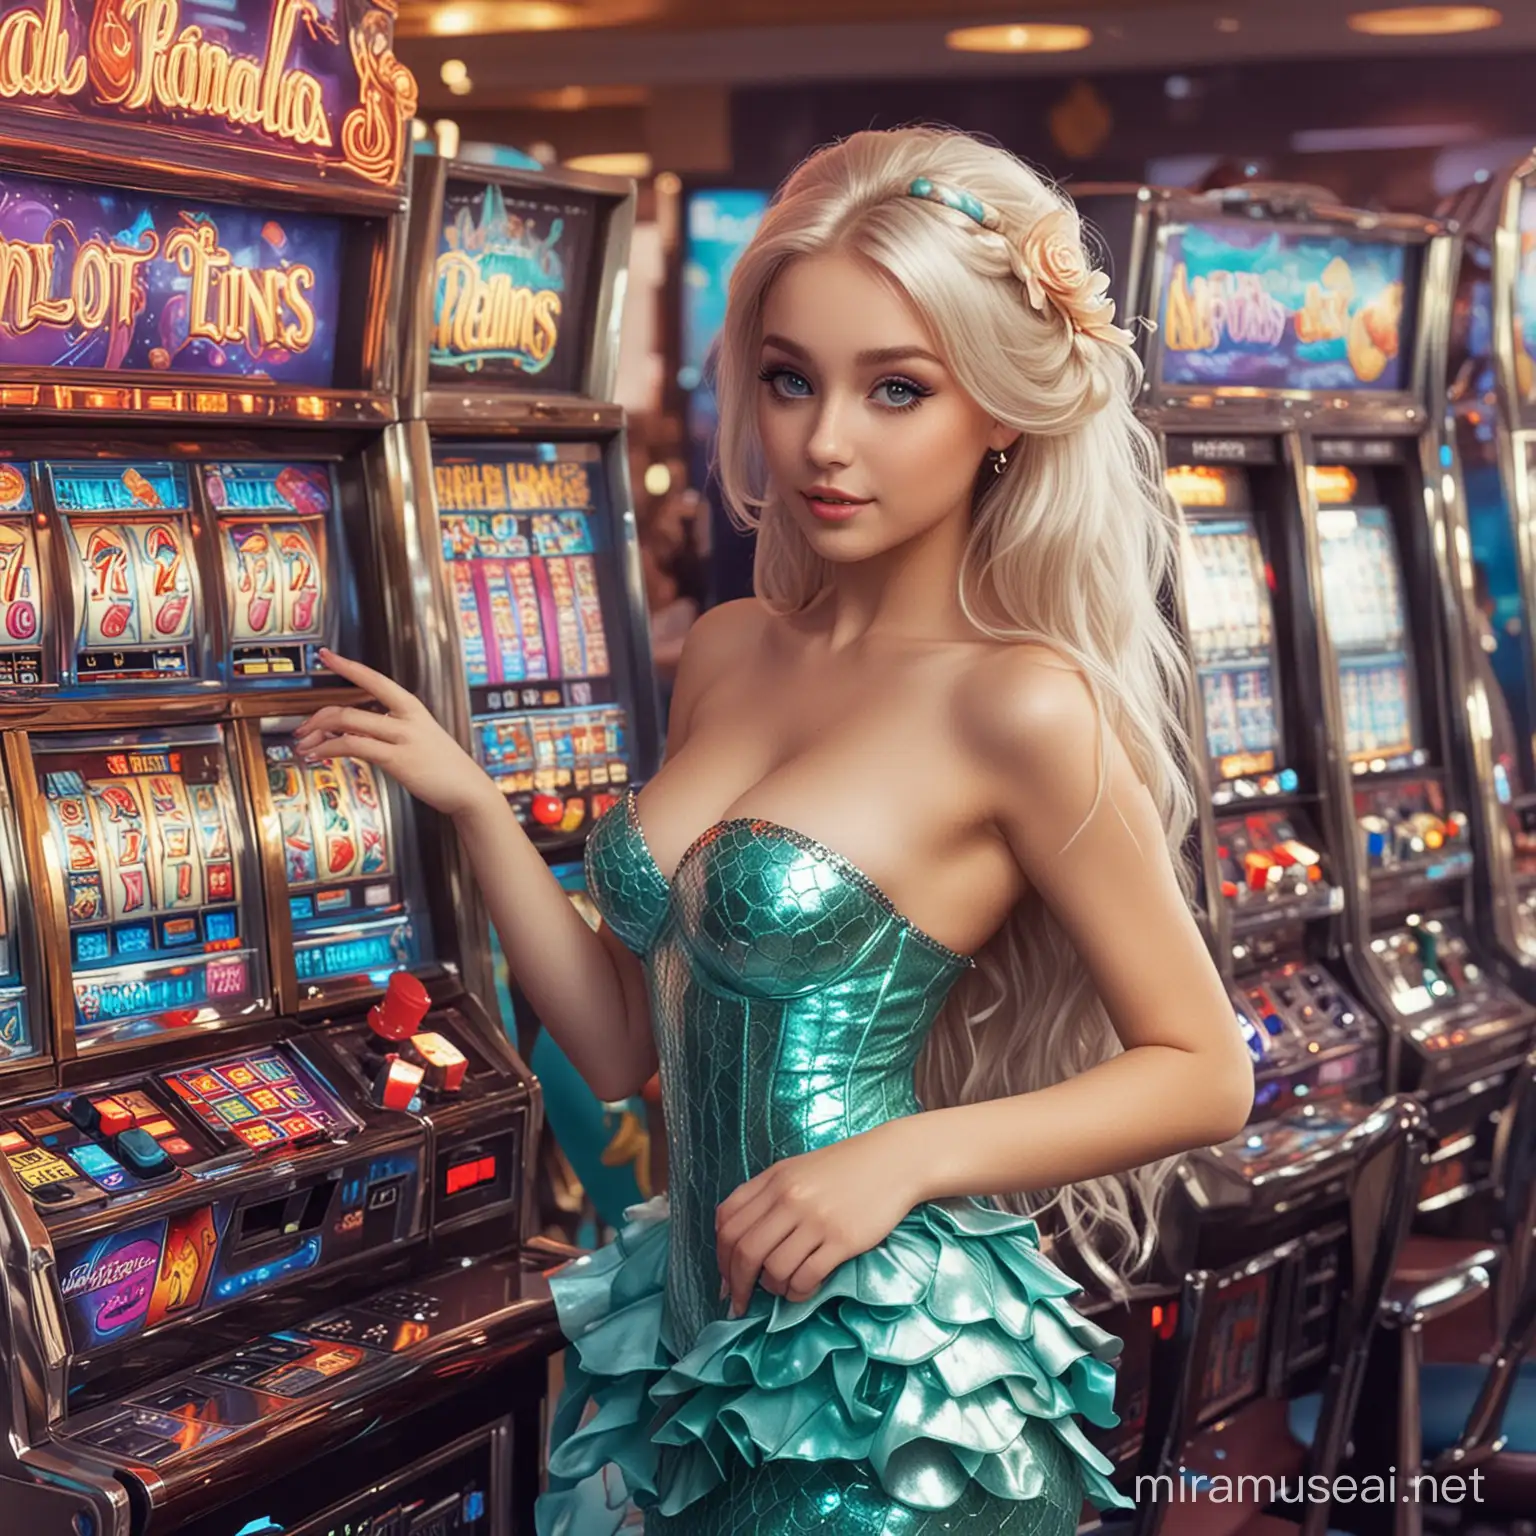 Enchanting Mermaids Surrounded by Glowing Slot Machines